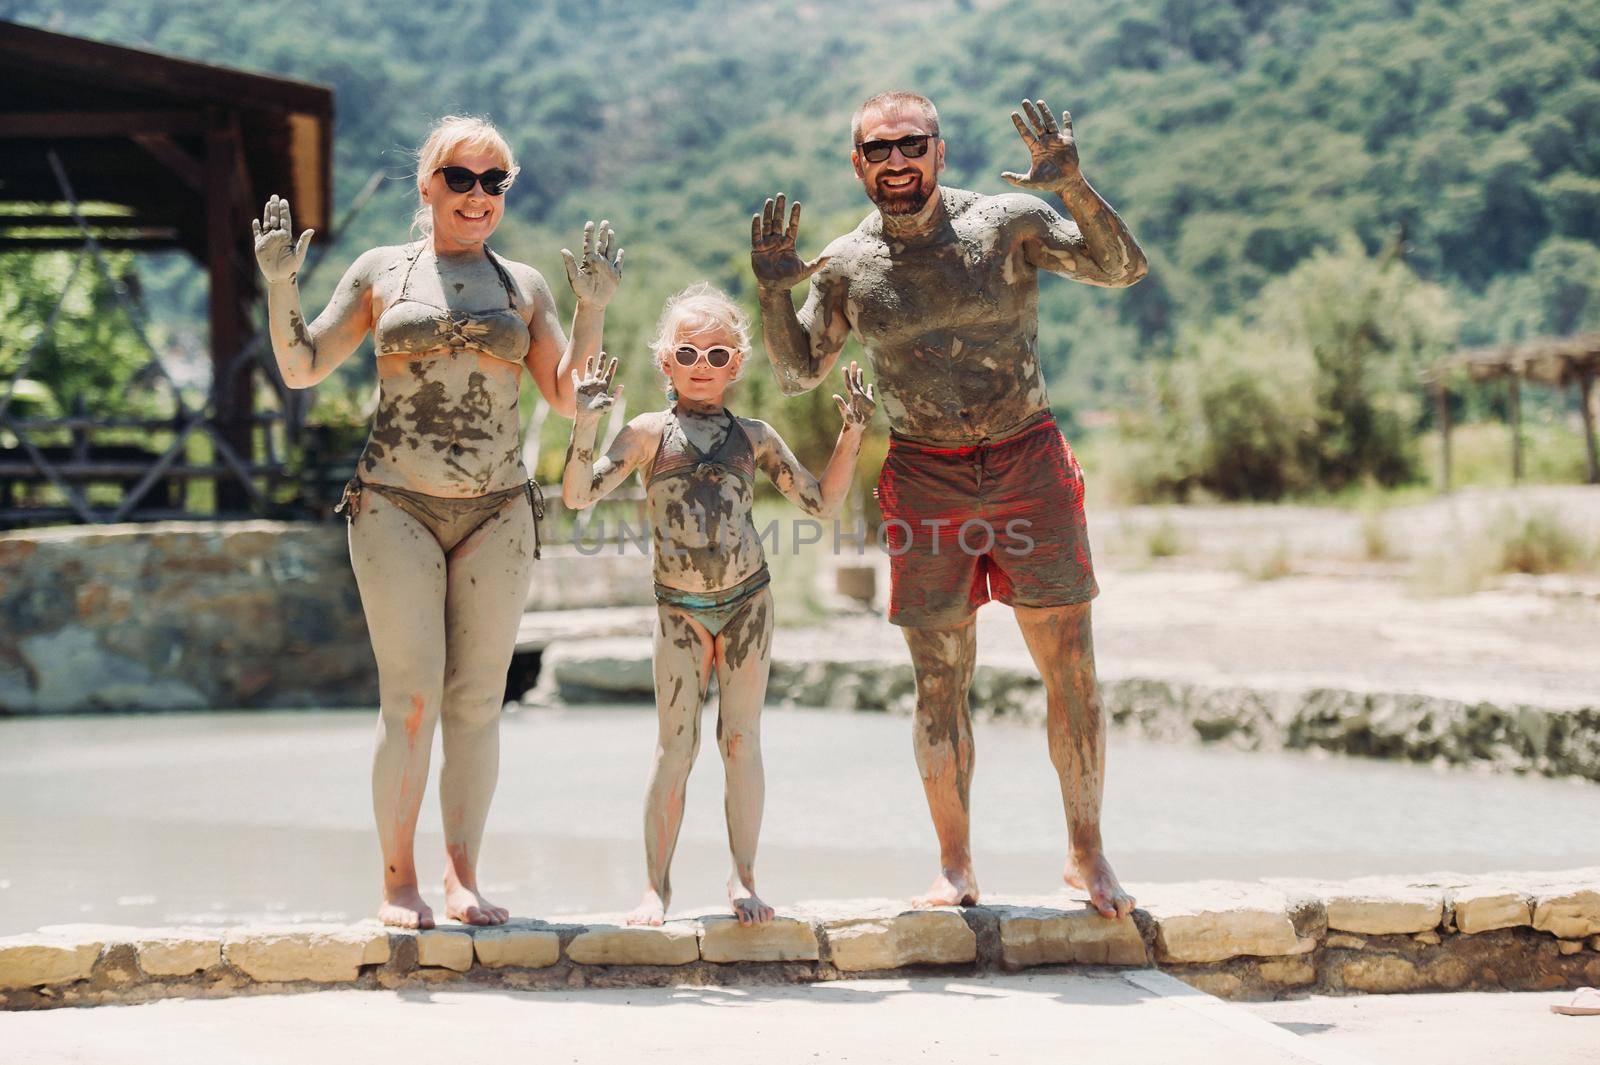 A happy family of three takes mud baths at a resort in Turkey.Family Wellness in therapeutic mud.Turkey by Lobachad